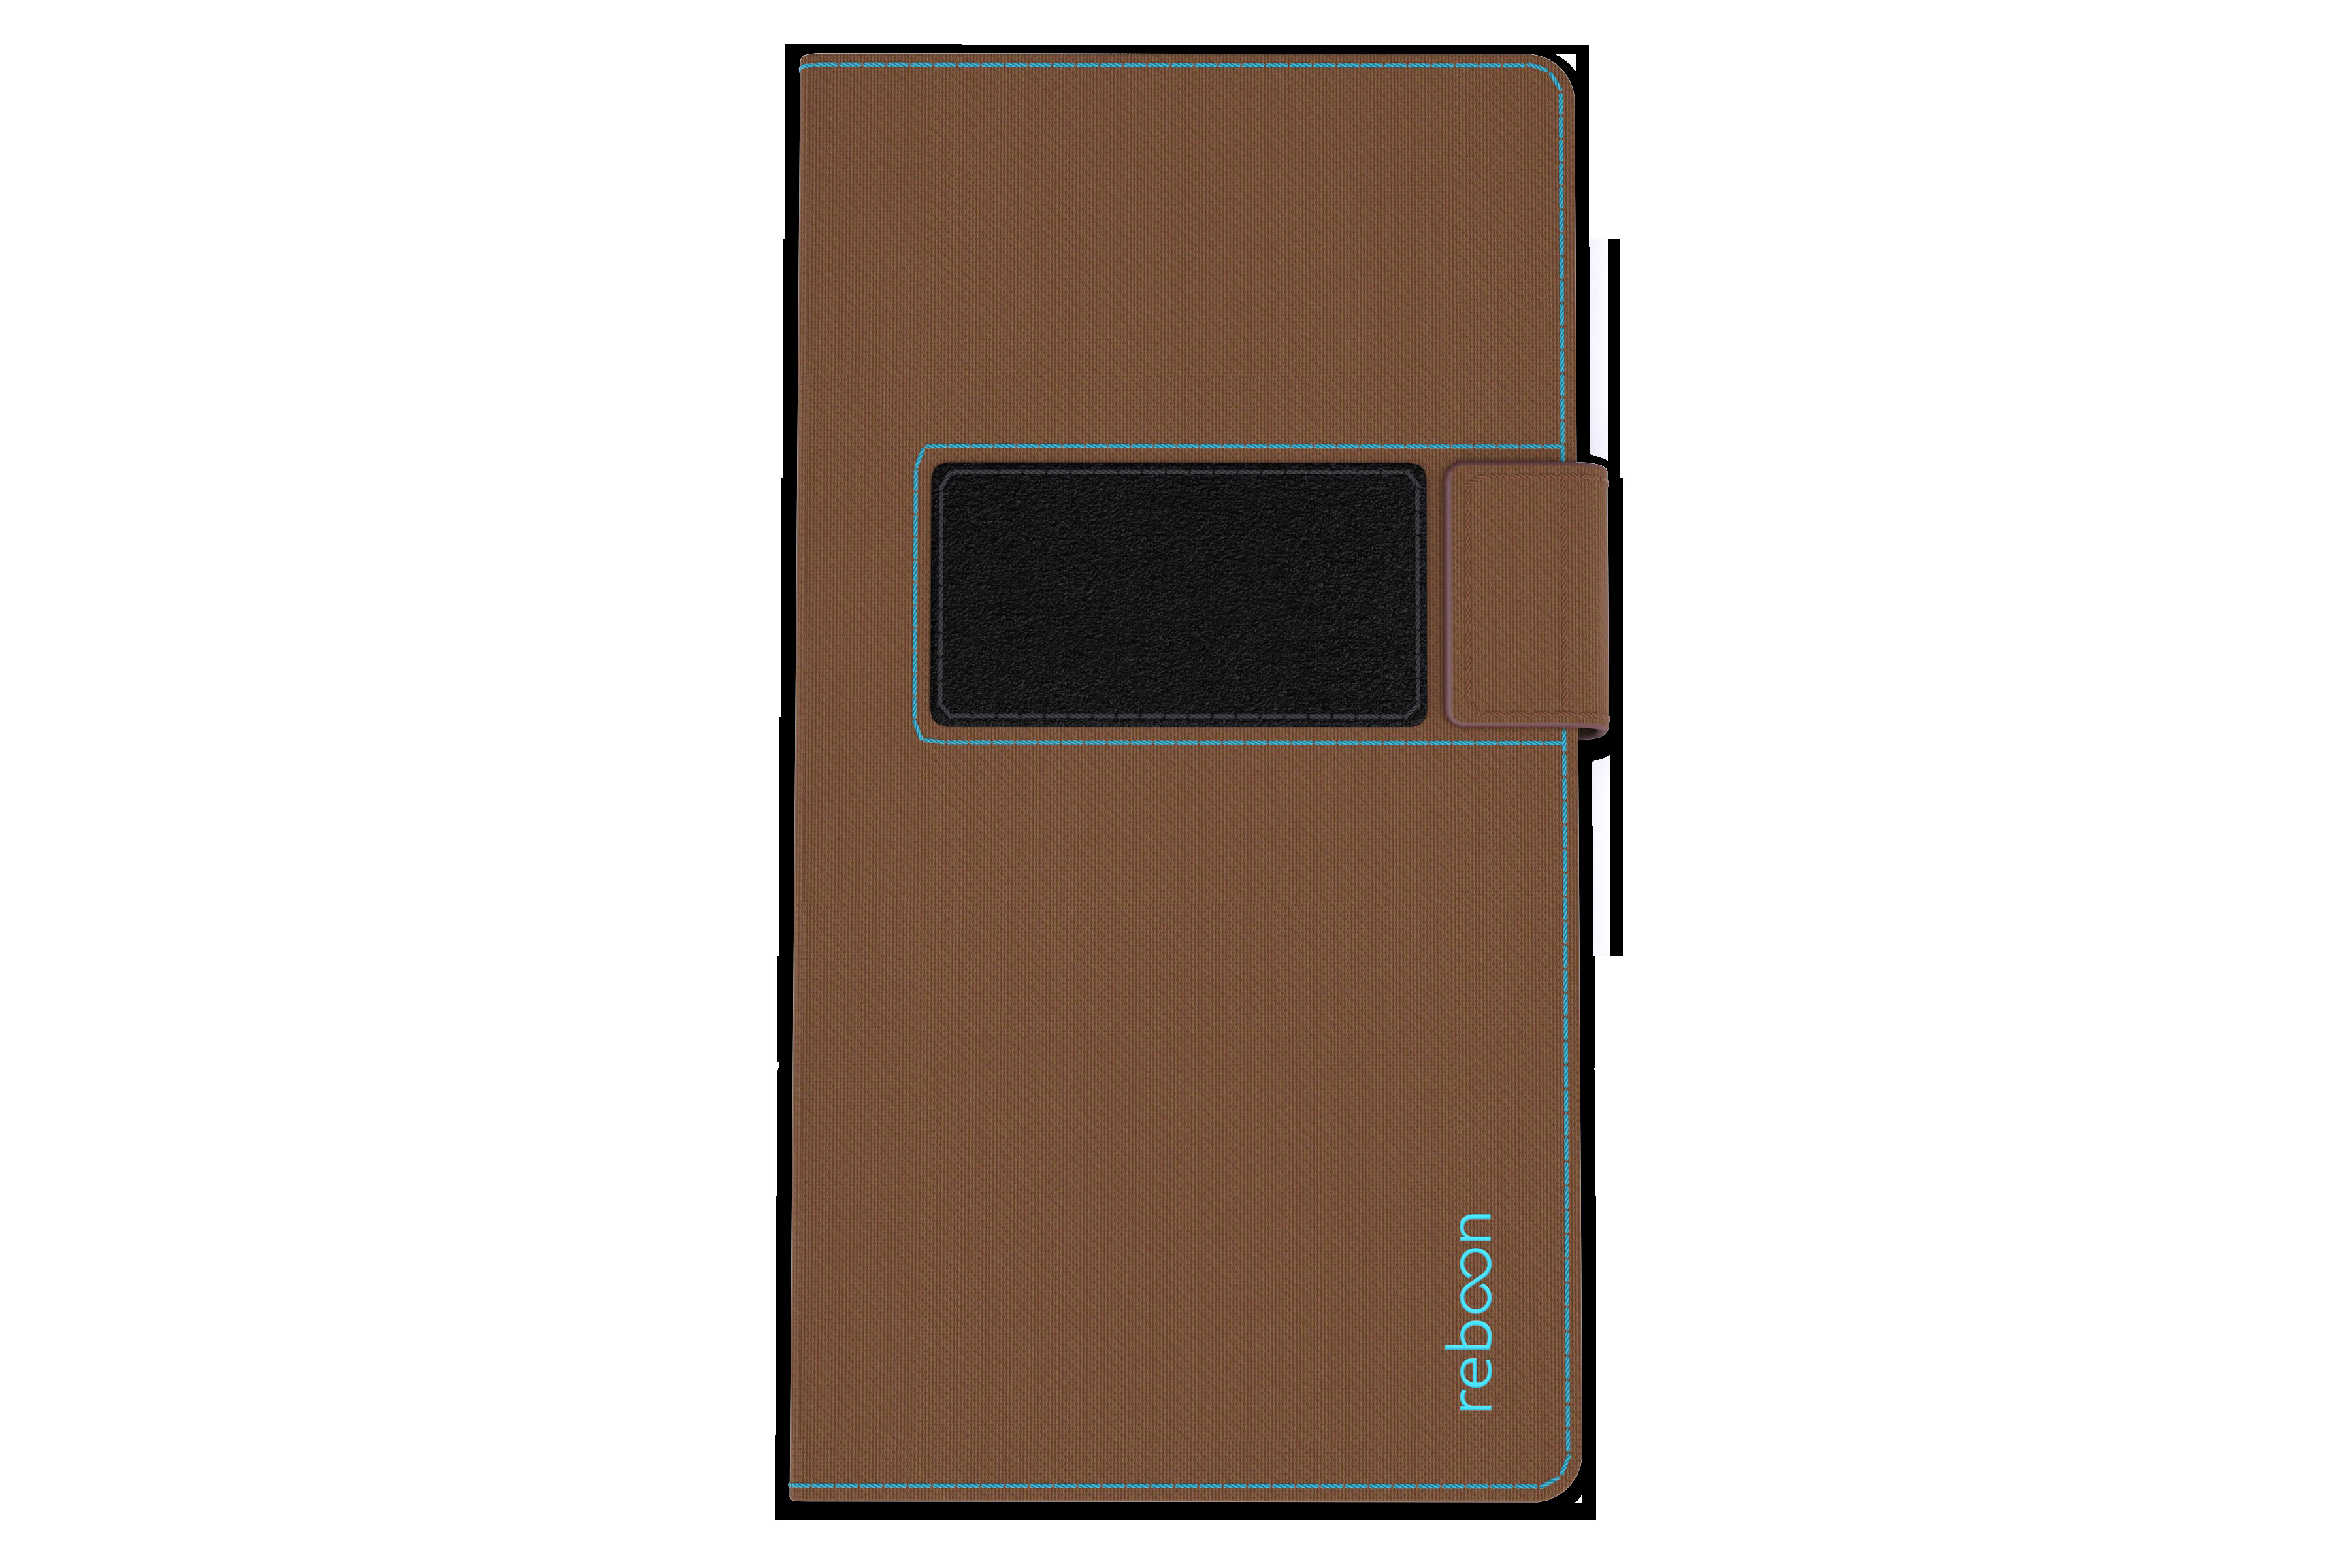 REBOON booncover XS2, Bookcover, Braun Universal, Universal